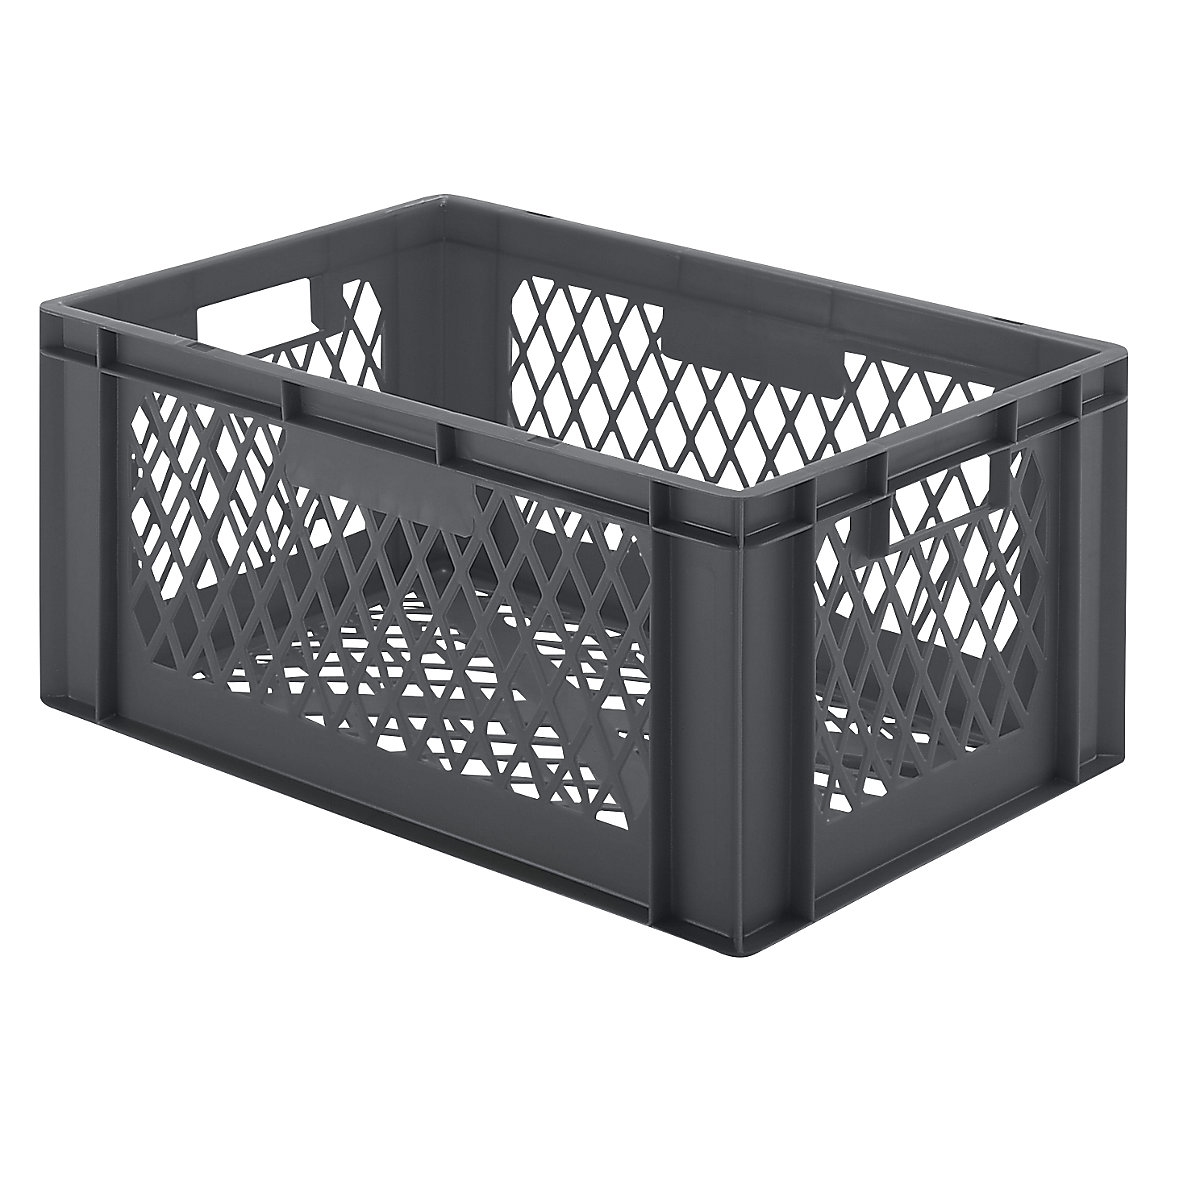 Euro stacking container, perforated walls and base, LxWxH 600 x 400 x 270 mm, grey, pack of 5